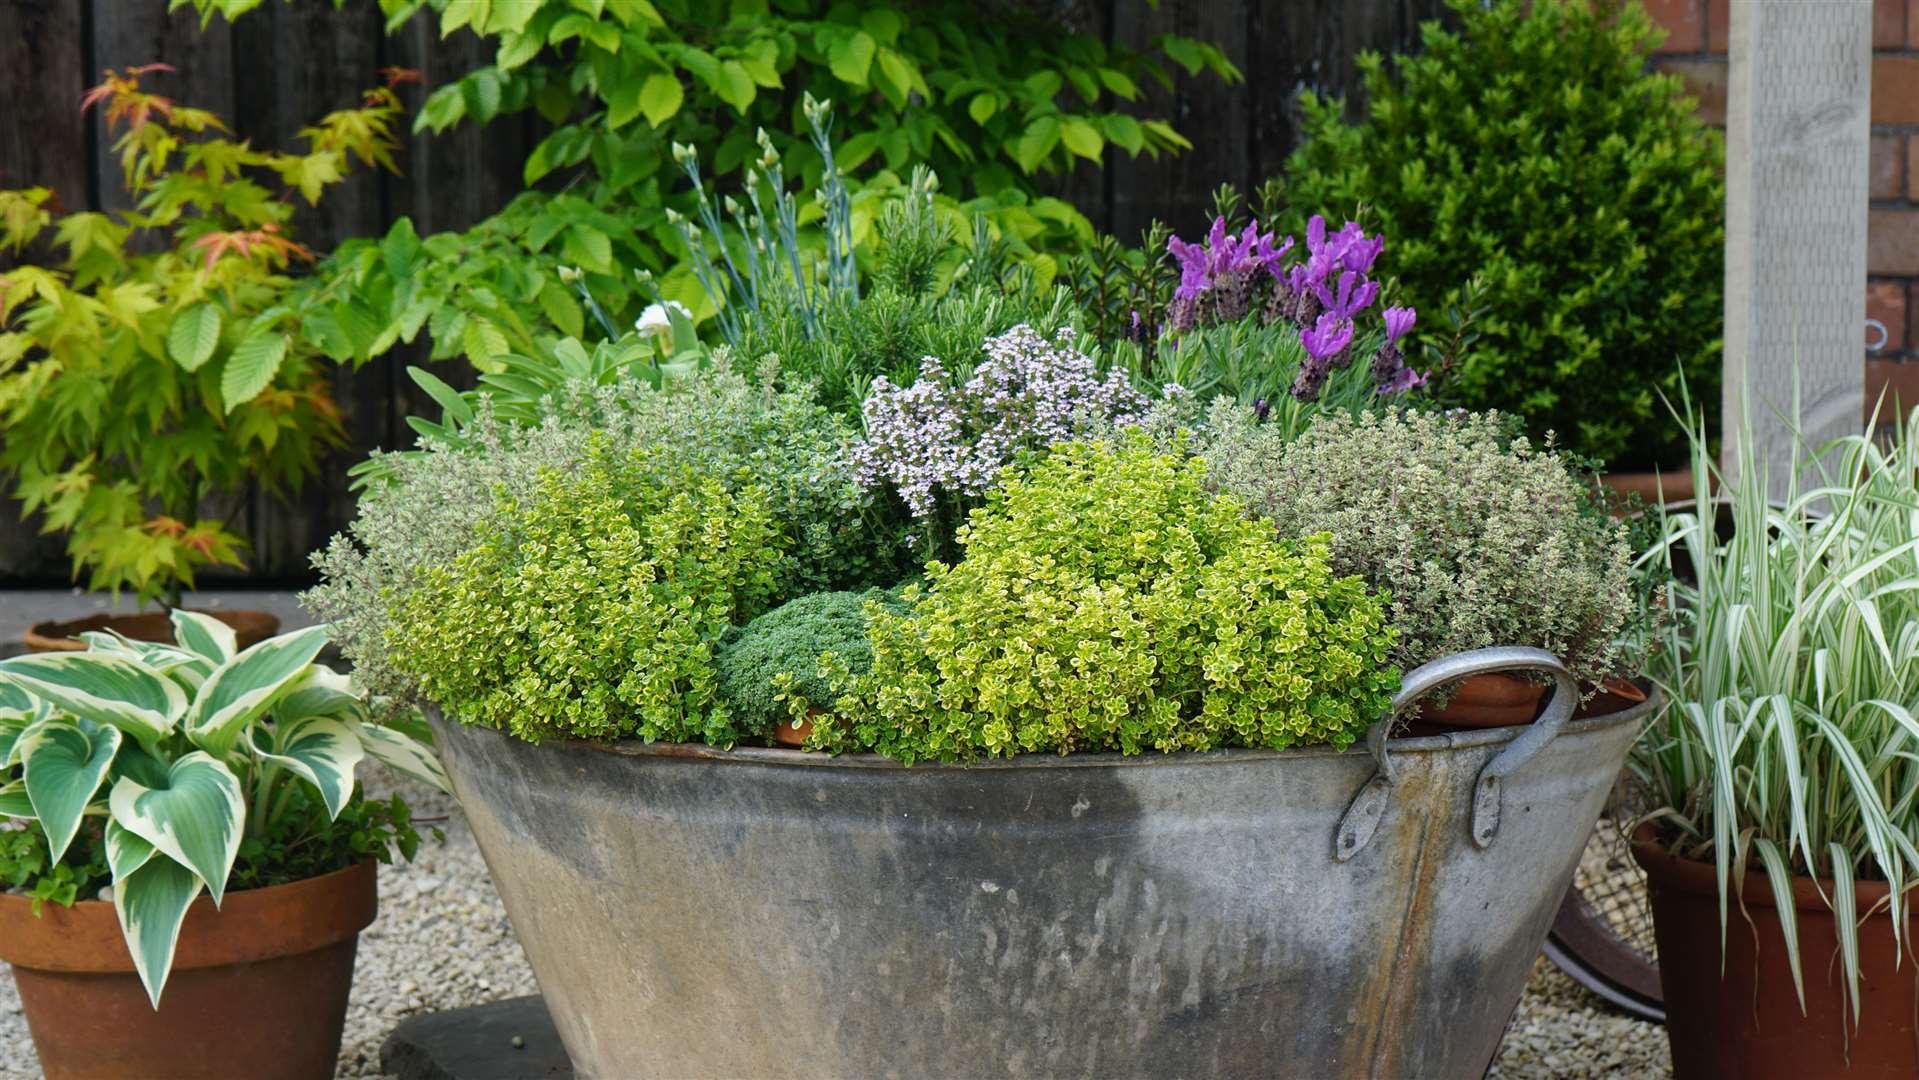 Pots of herbs positioned together in a larger container. Picture: Tom Harris/PA